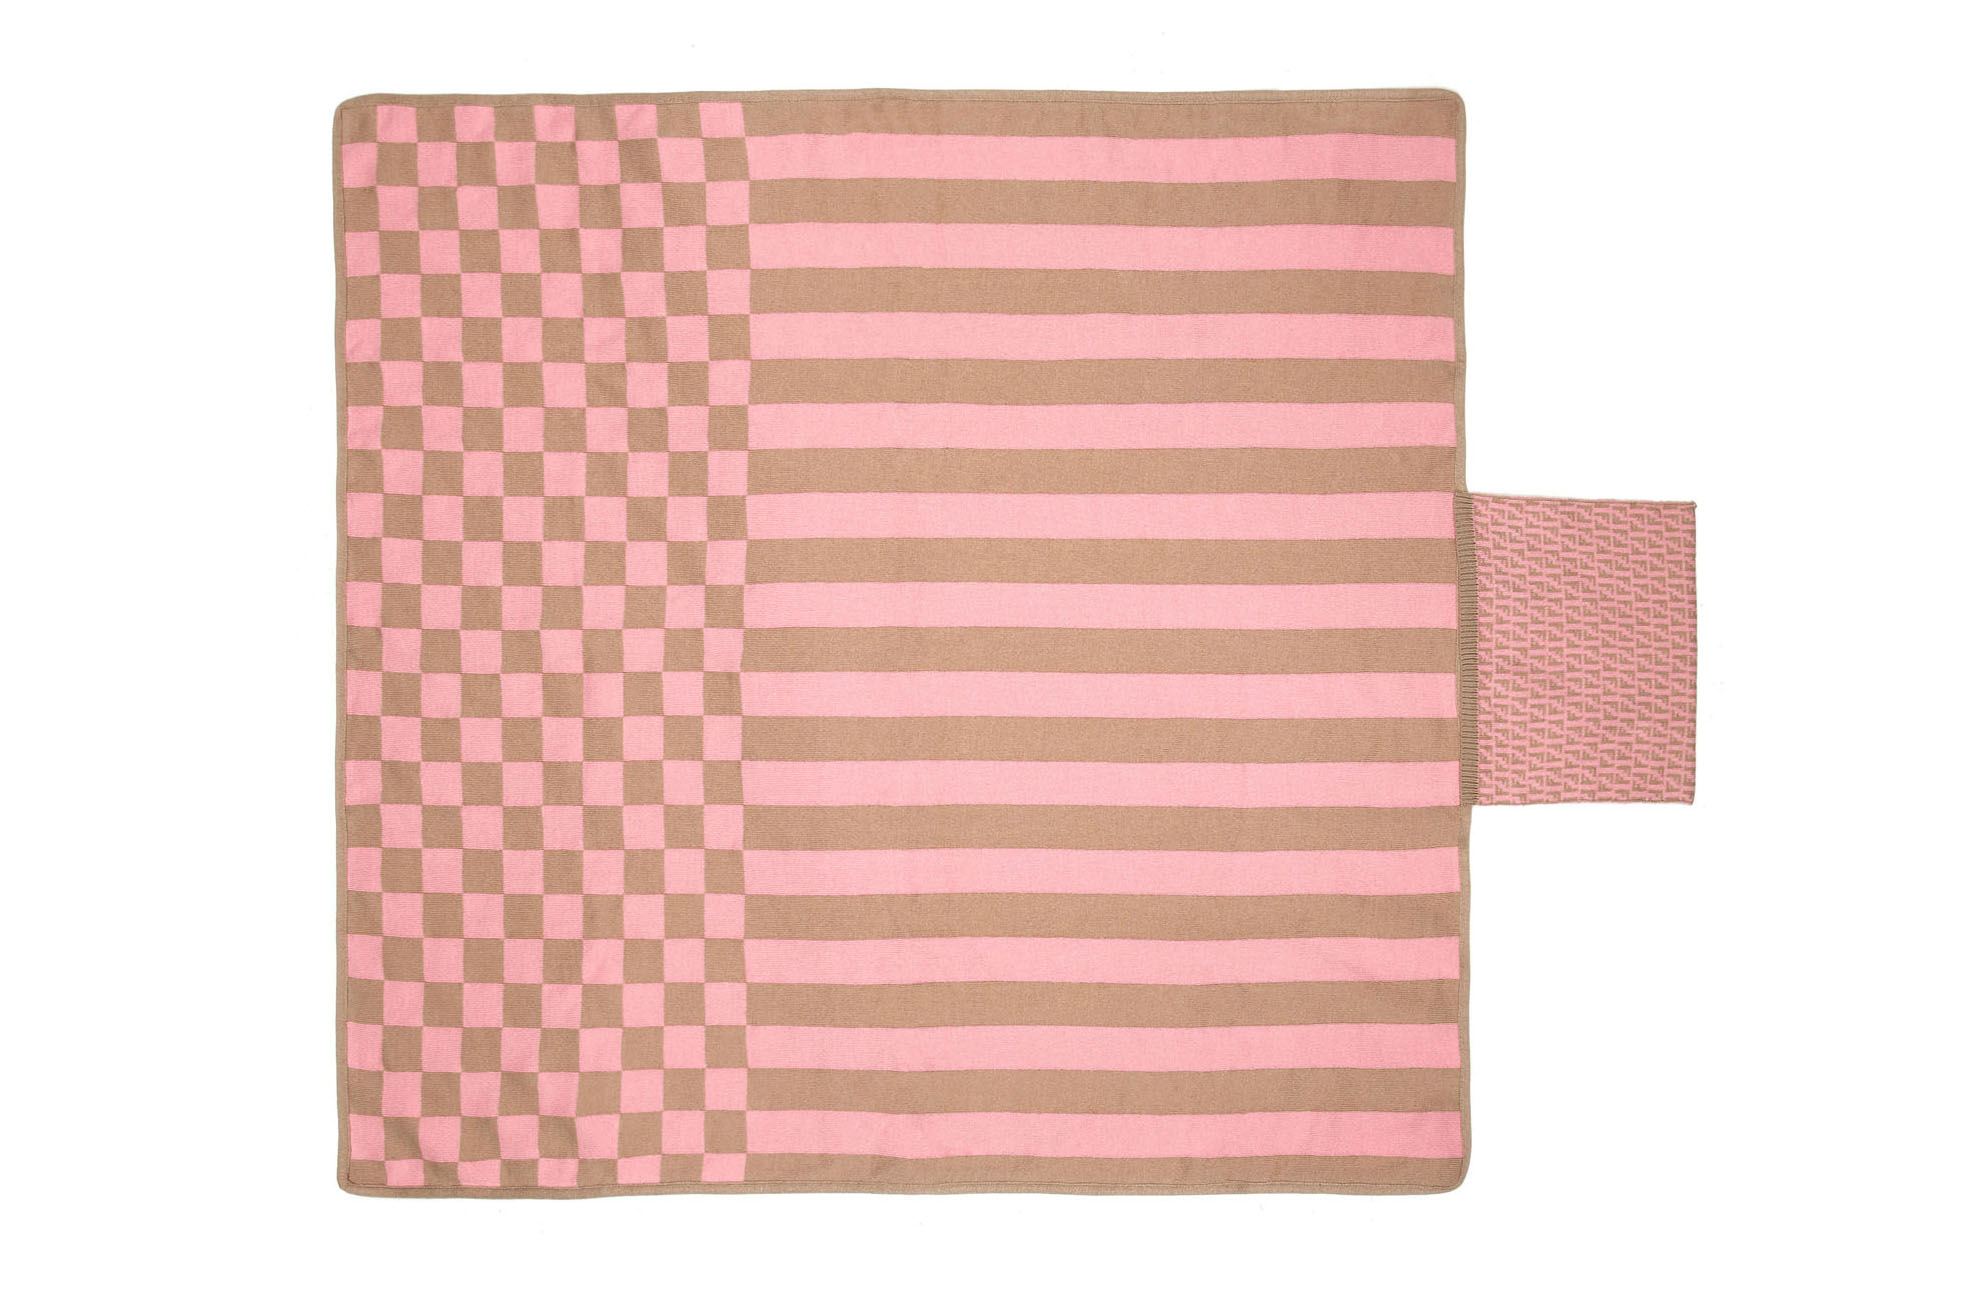 sella-mccartney The Chicest Baby Blankets of the Season